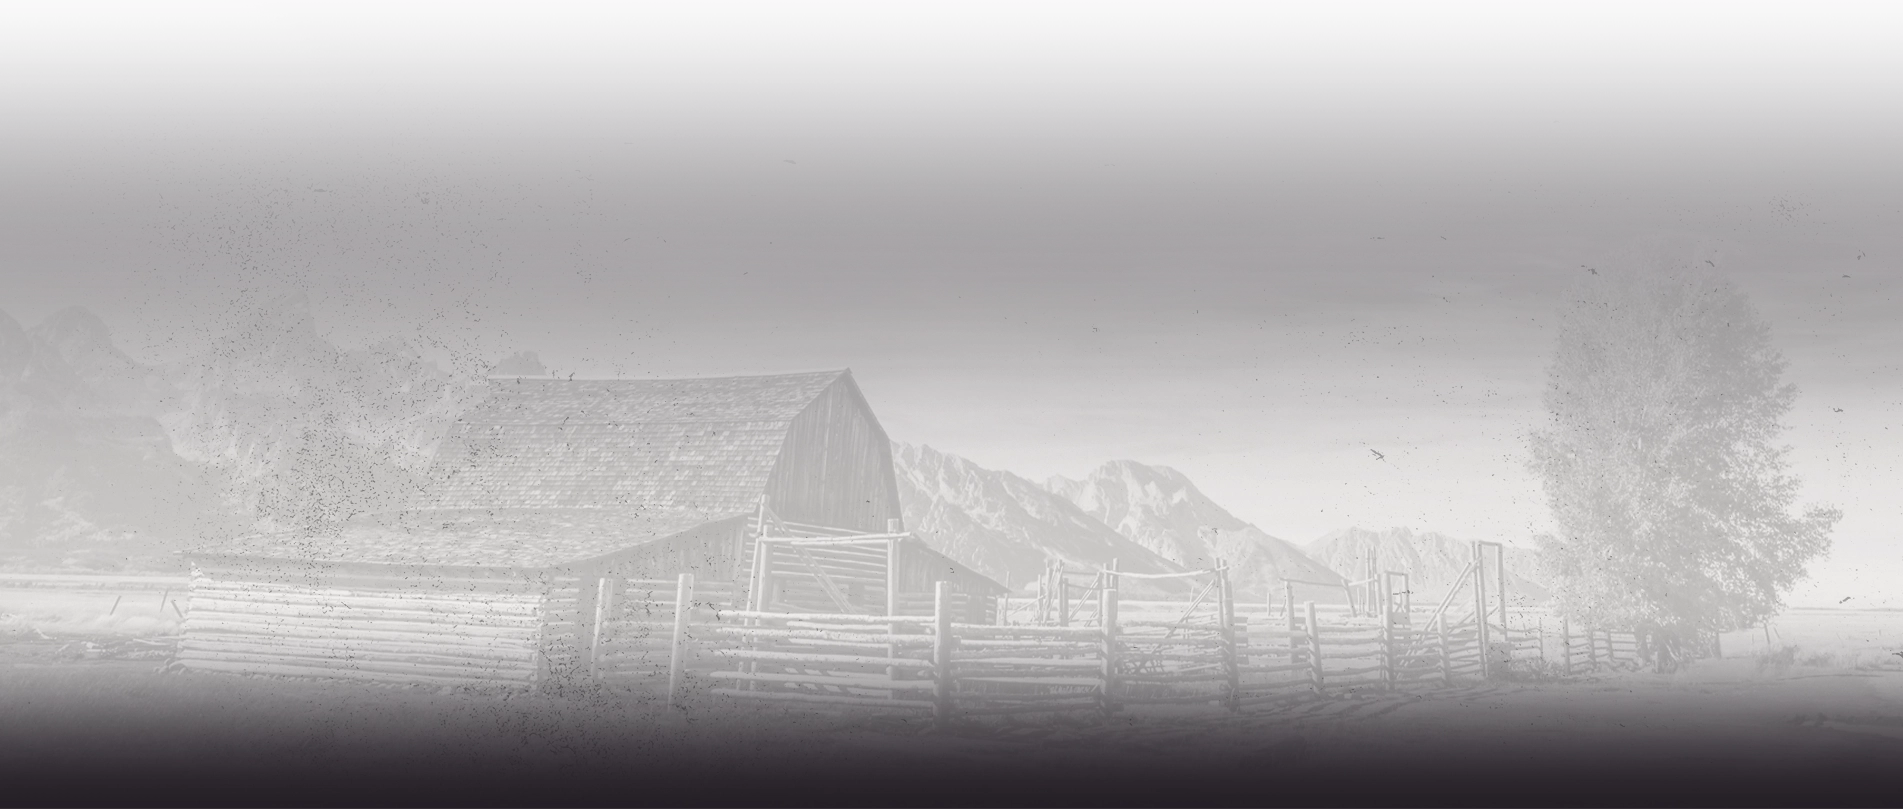 Landscape image of a antique barn with a fence around it and a free out front, with picturesque mountains in the background. There is a white and grey overlay to the image.